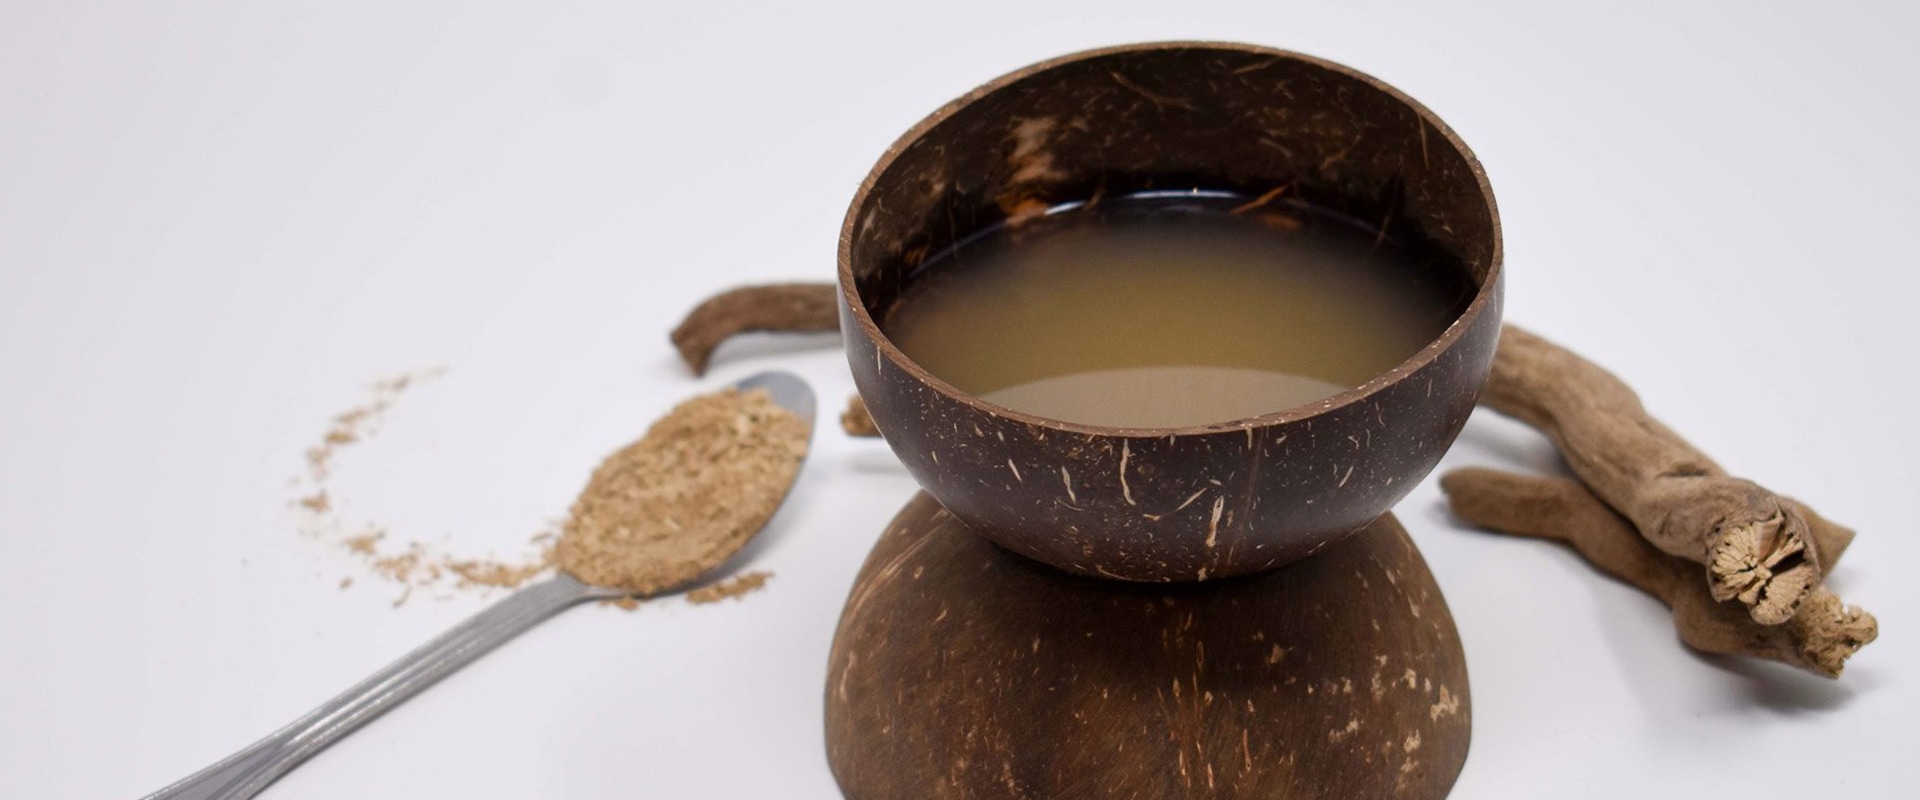 The Science Behind Hawaiian Kava Root: How Long Does it Take for the Effects to Kick In?